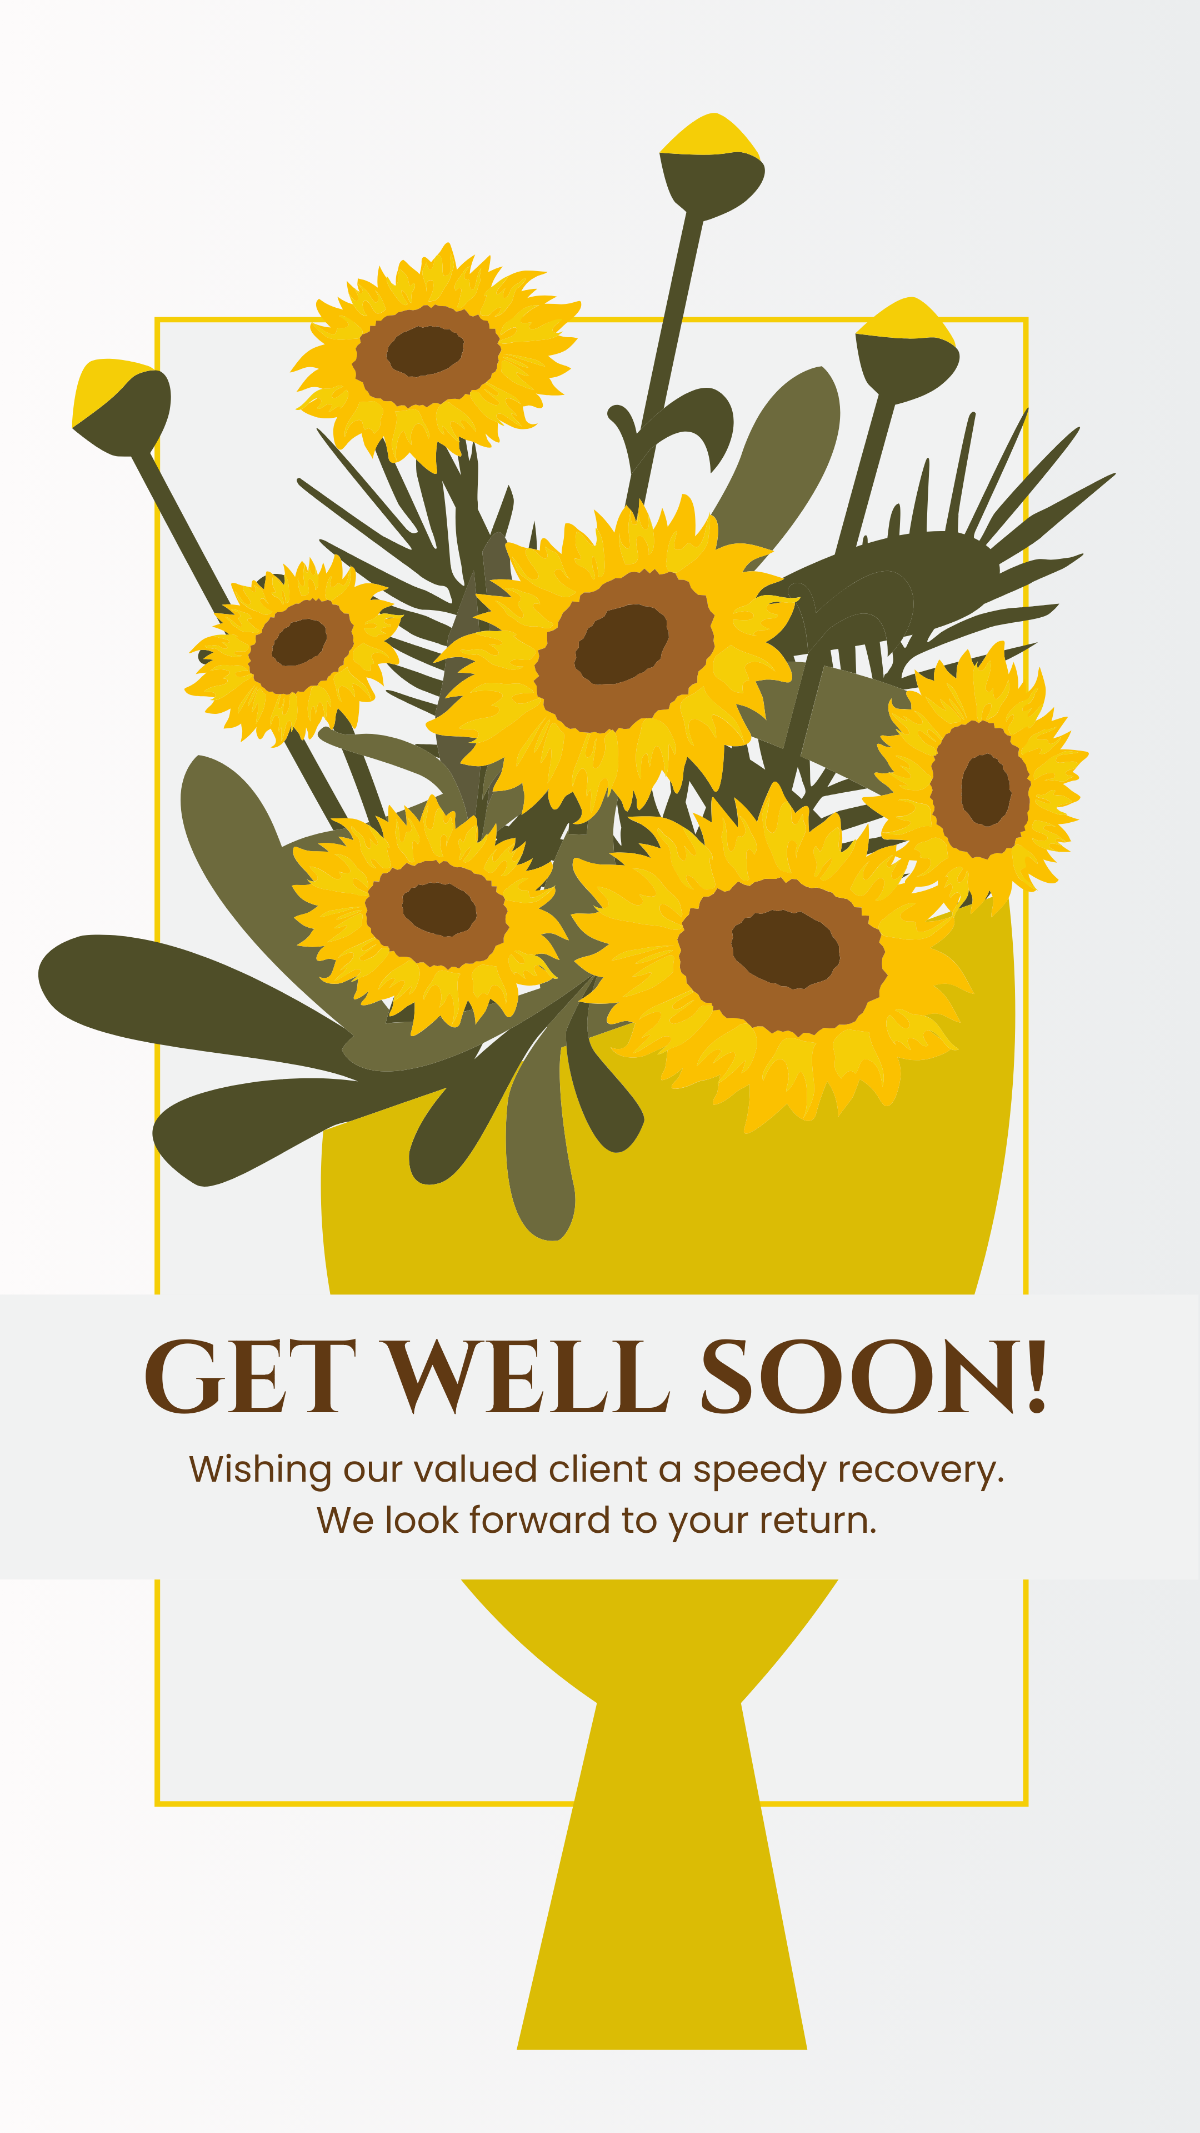 Get Well Soon Message For Client